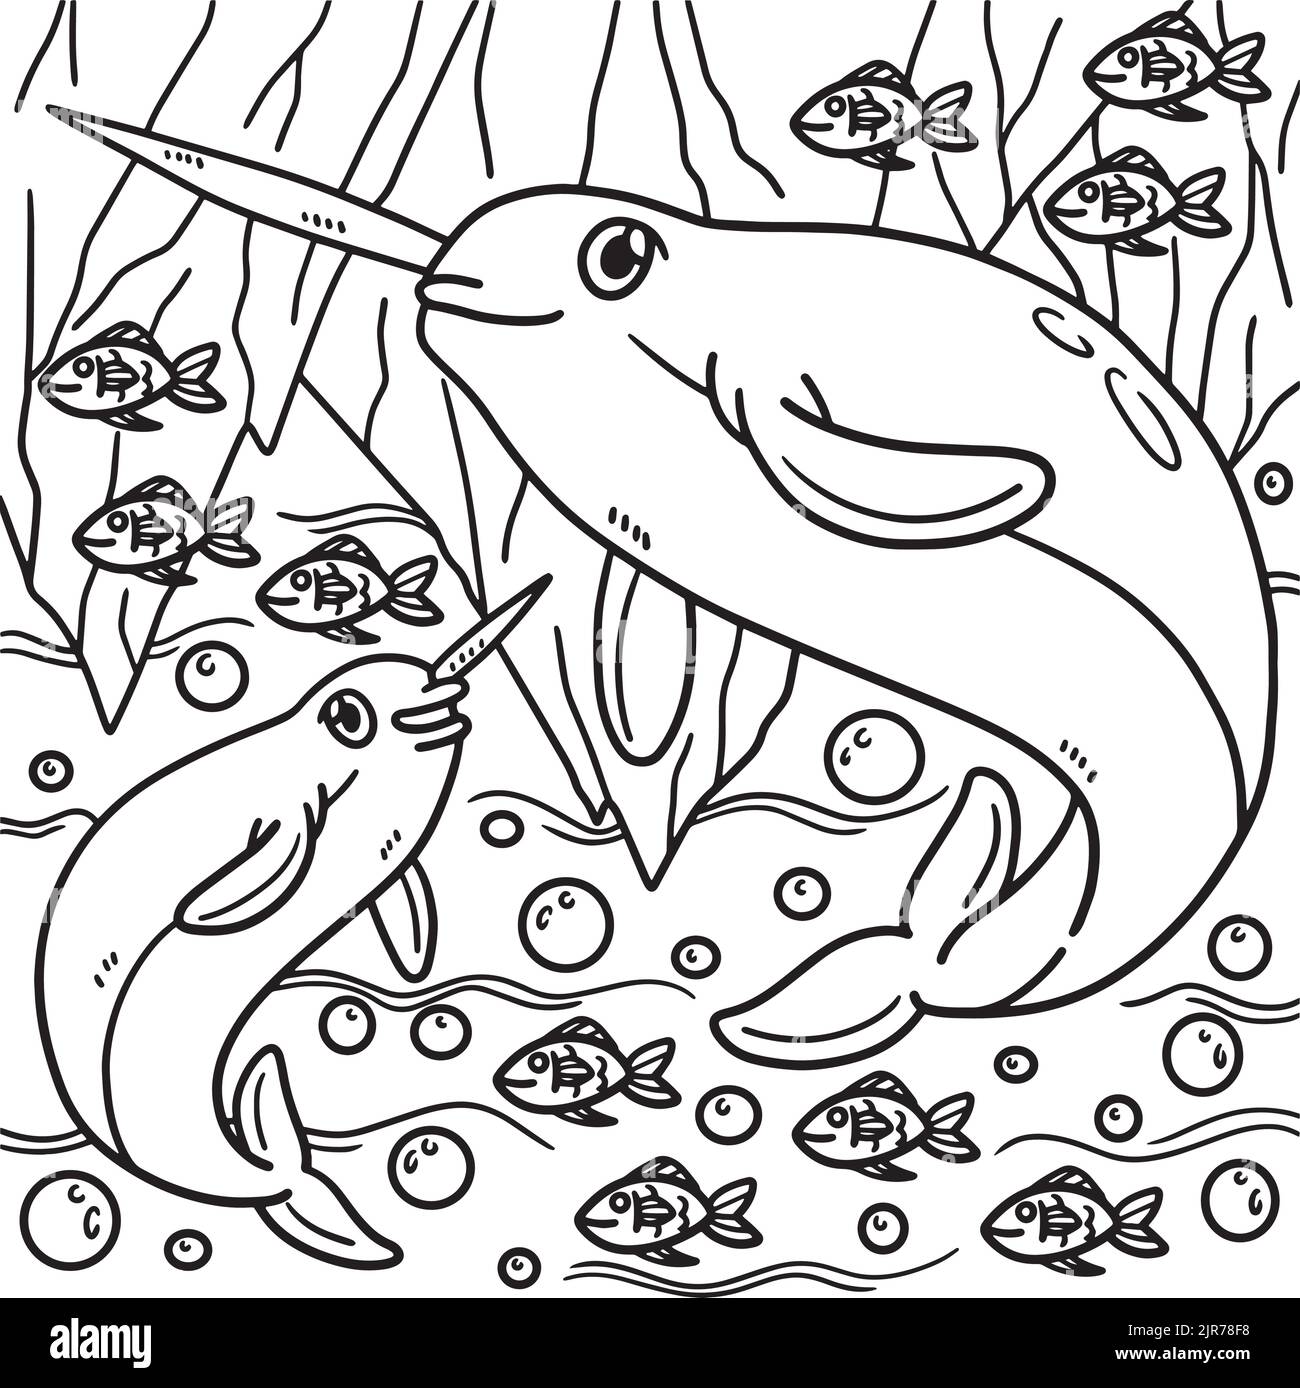 Narwhal Coloring Page for Kids Stock Vector